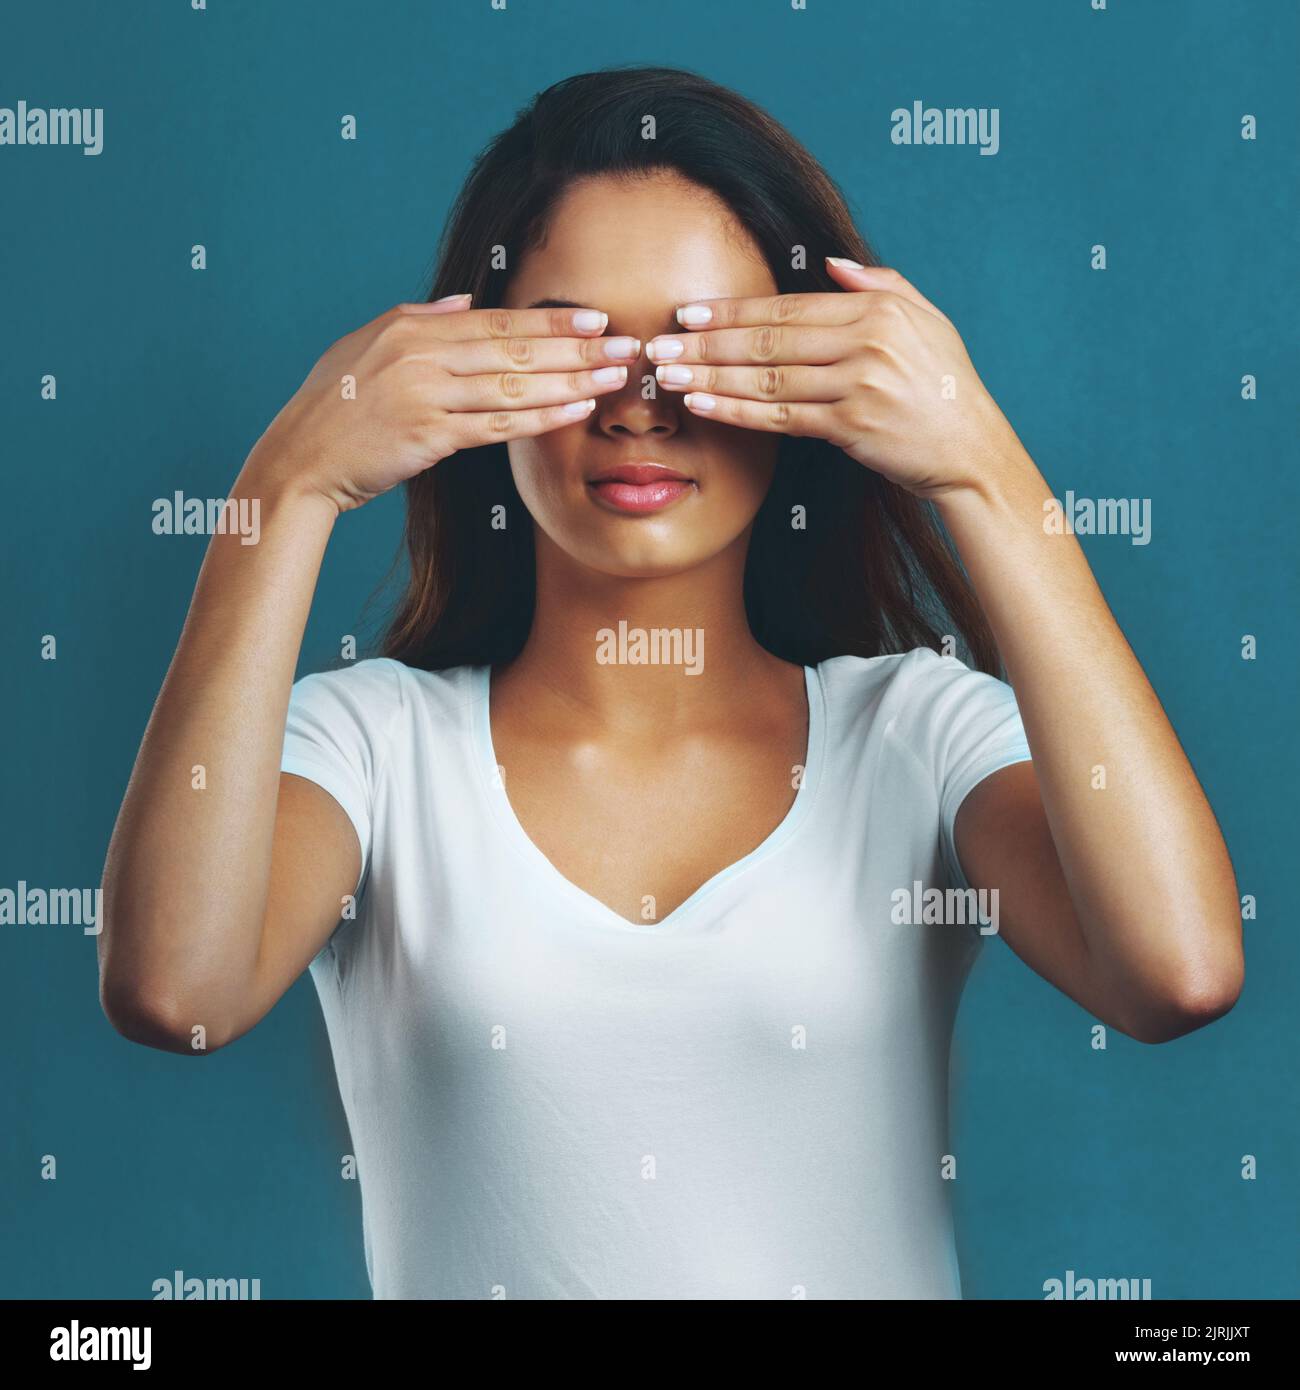 I didnt see anything. Studio shot of an attractive young woman covering her eyes against a blue background. Stock Photo